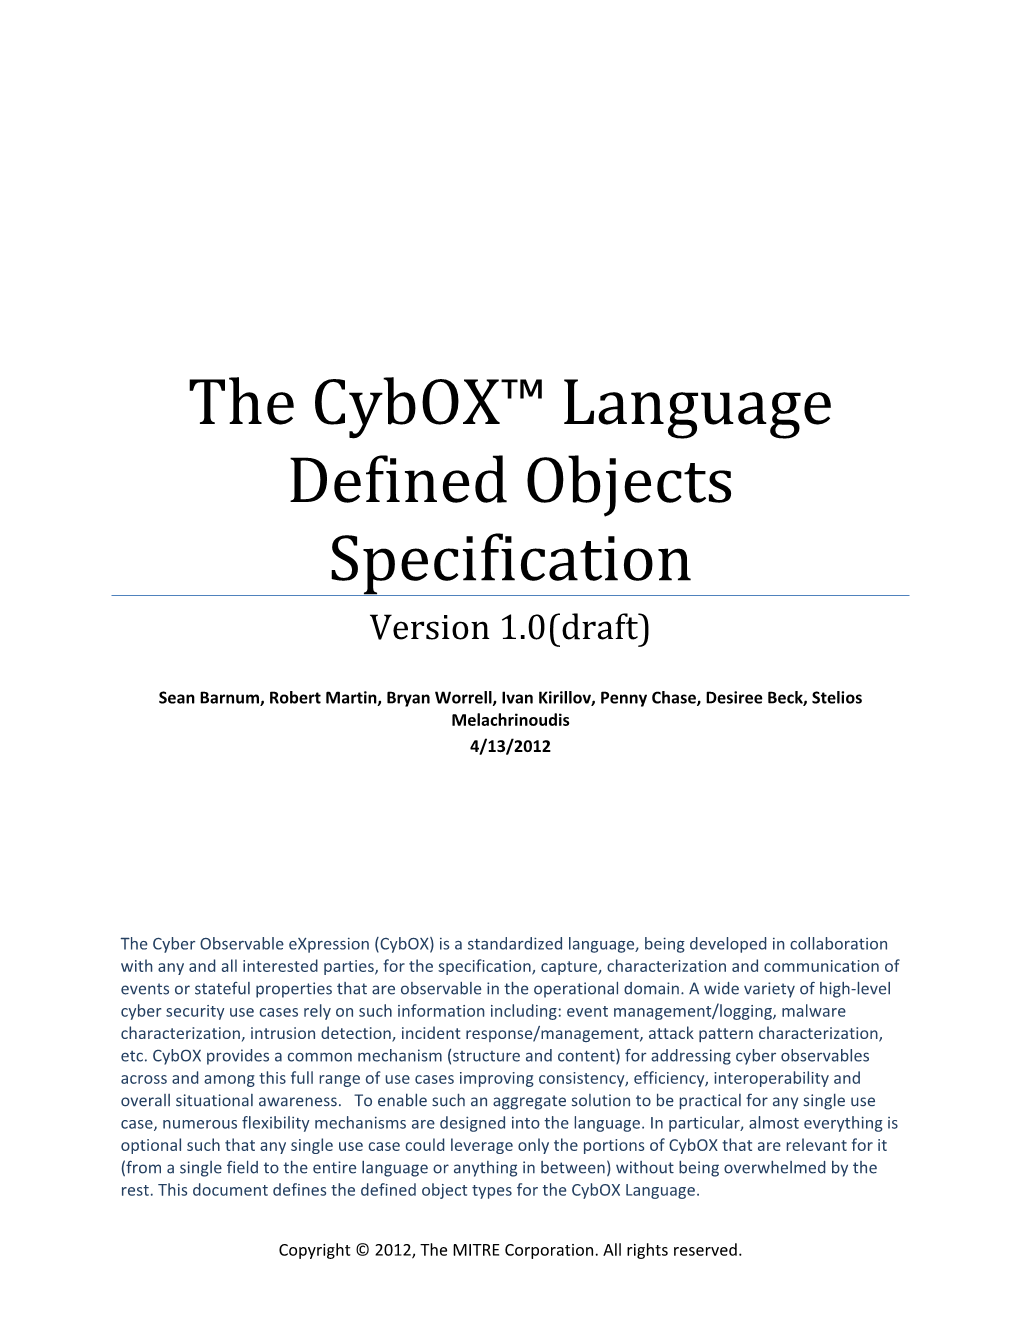 The Cybox™ Language Defined Objects Specification Version 1.0(Draft)